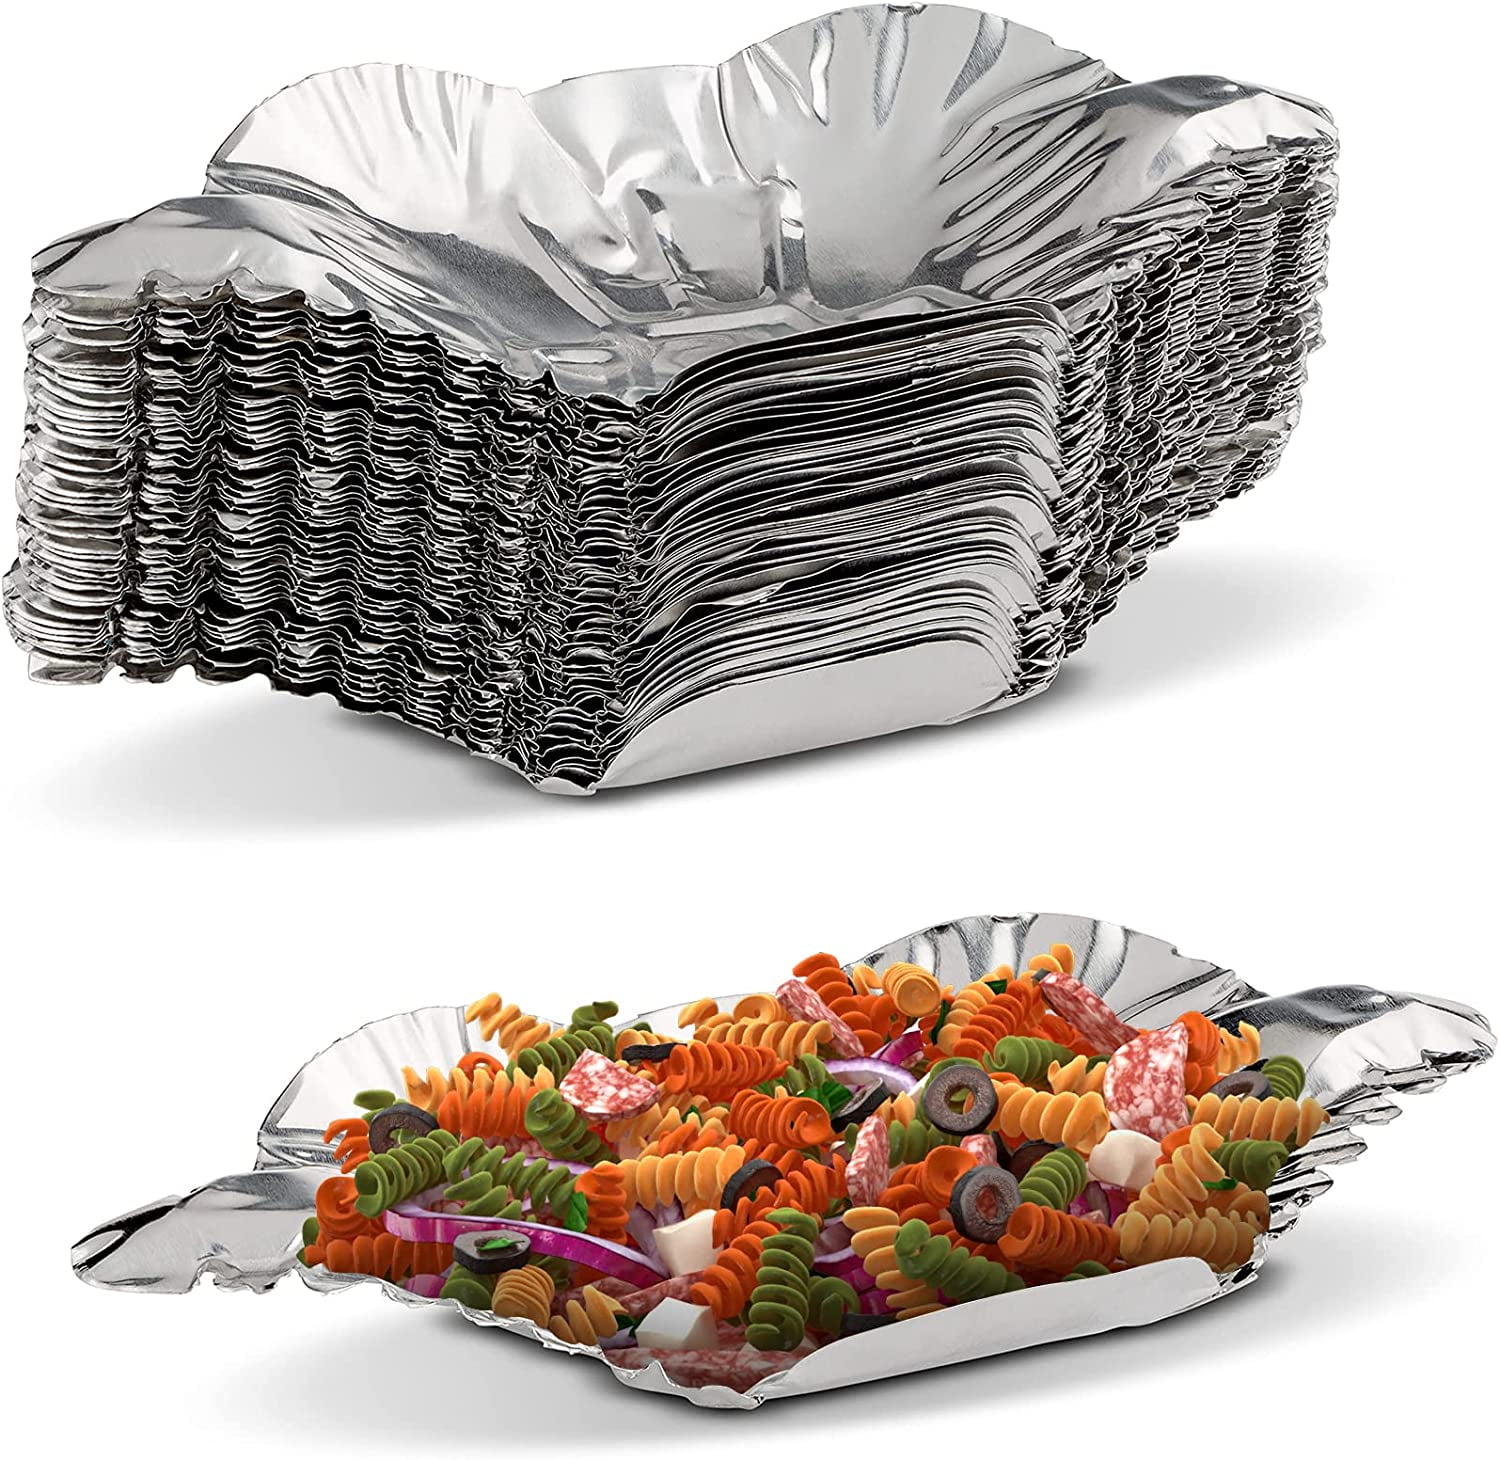 PLASTICPRO Disposable 4 LB Aluminum Takeout Tin Foil Oblong Baking Pans  12'' X 8'' X 2'' Inch With Cardboard Lids - Brownies, Bread, or Lunchbox,  Pack